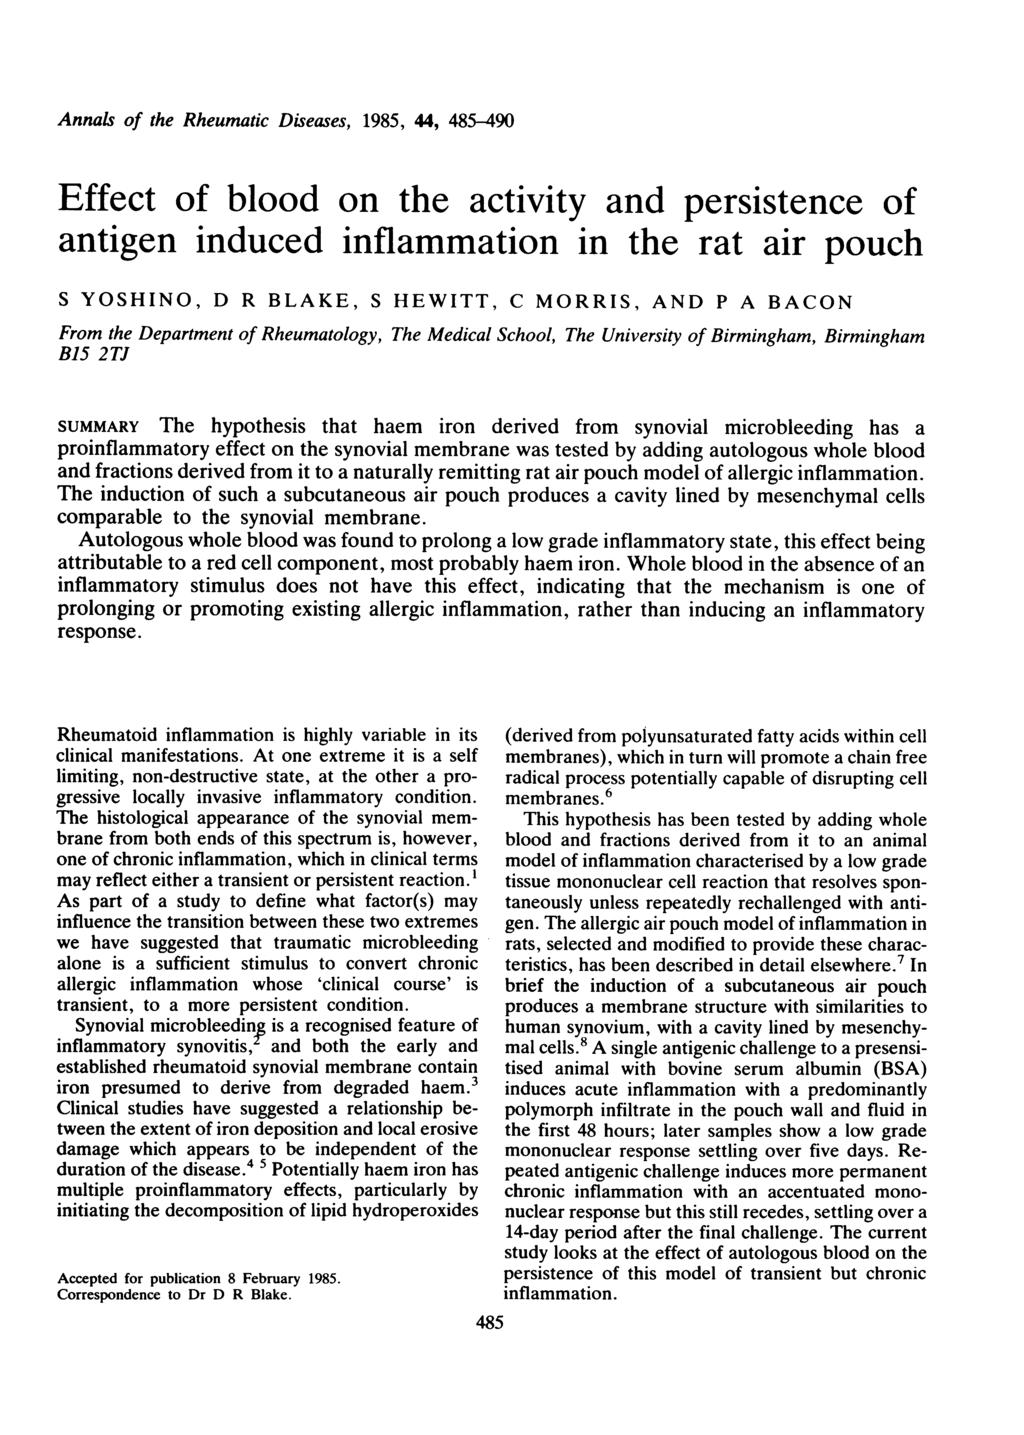 Annals of the Rheumatic Diseases, 1985, 44, 485-490 Effect of blood on the activity and persistence of antigen induced inflammation in the rat air pouch S YOSHINO, D R BLAKE, S HEWITT, C MORRIS, AND